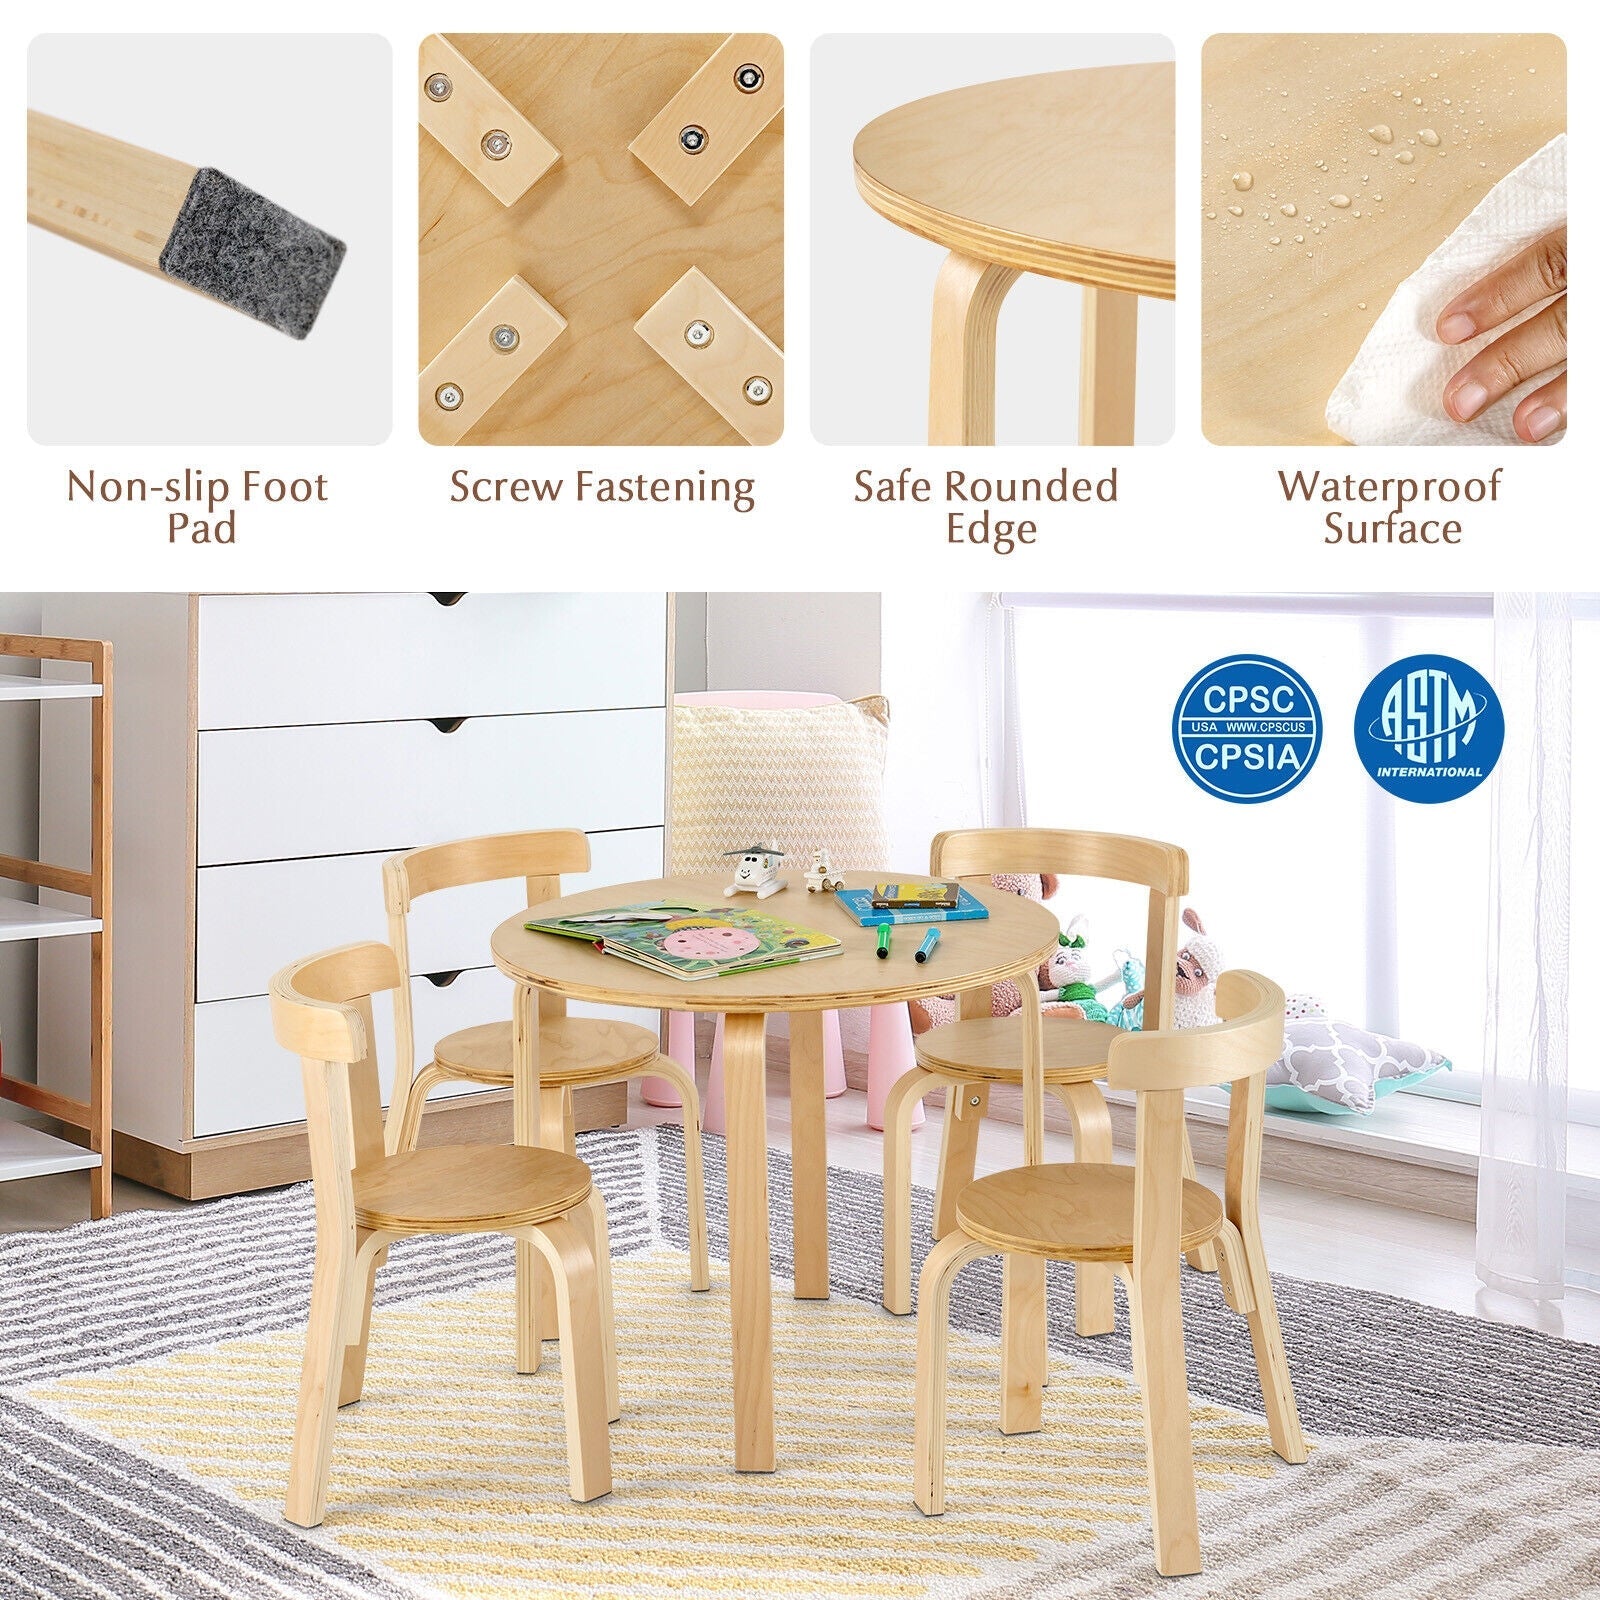 5-Piece Wooden Activity Table and Chair Set with Toy Bricks for Kids